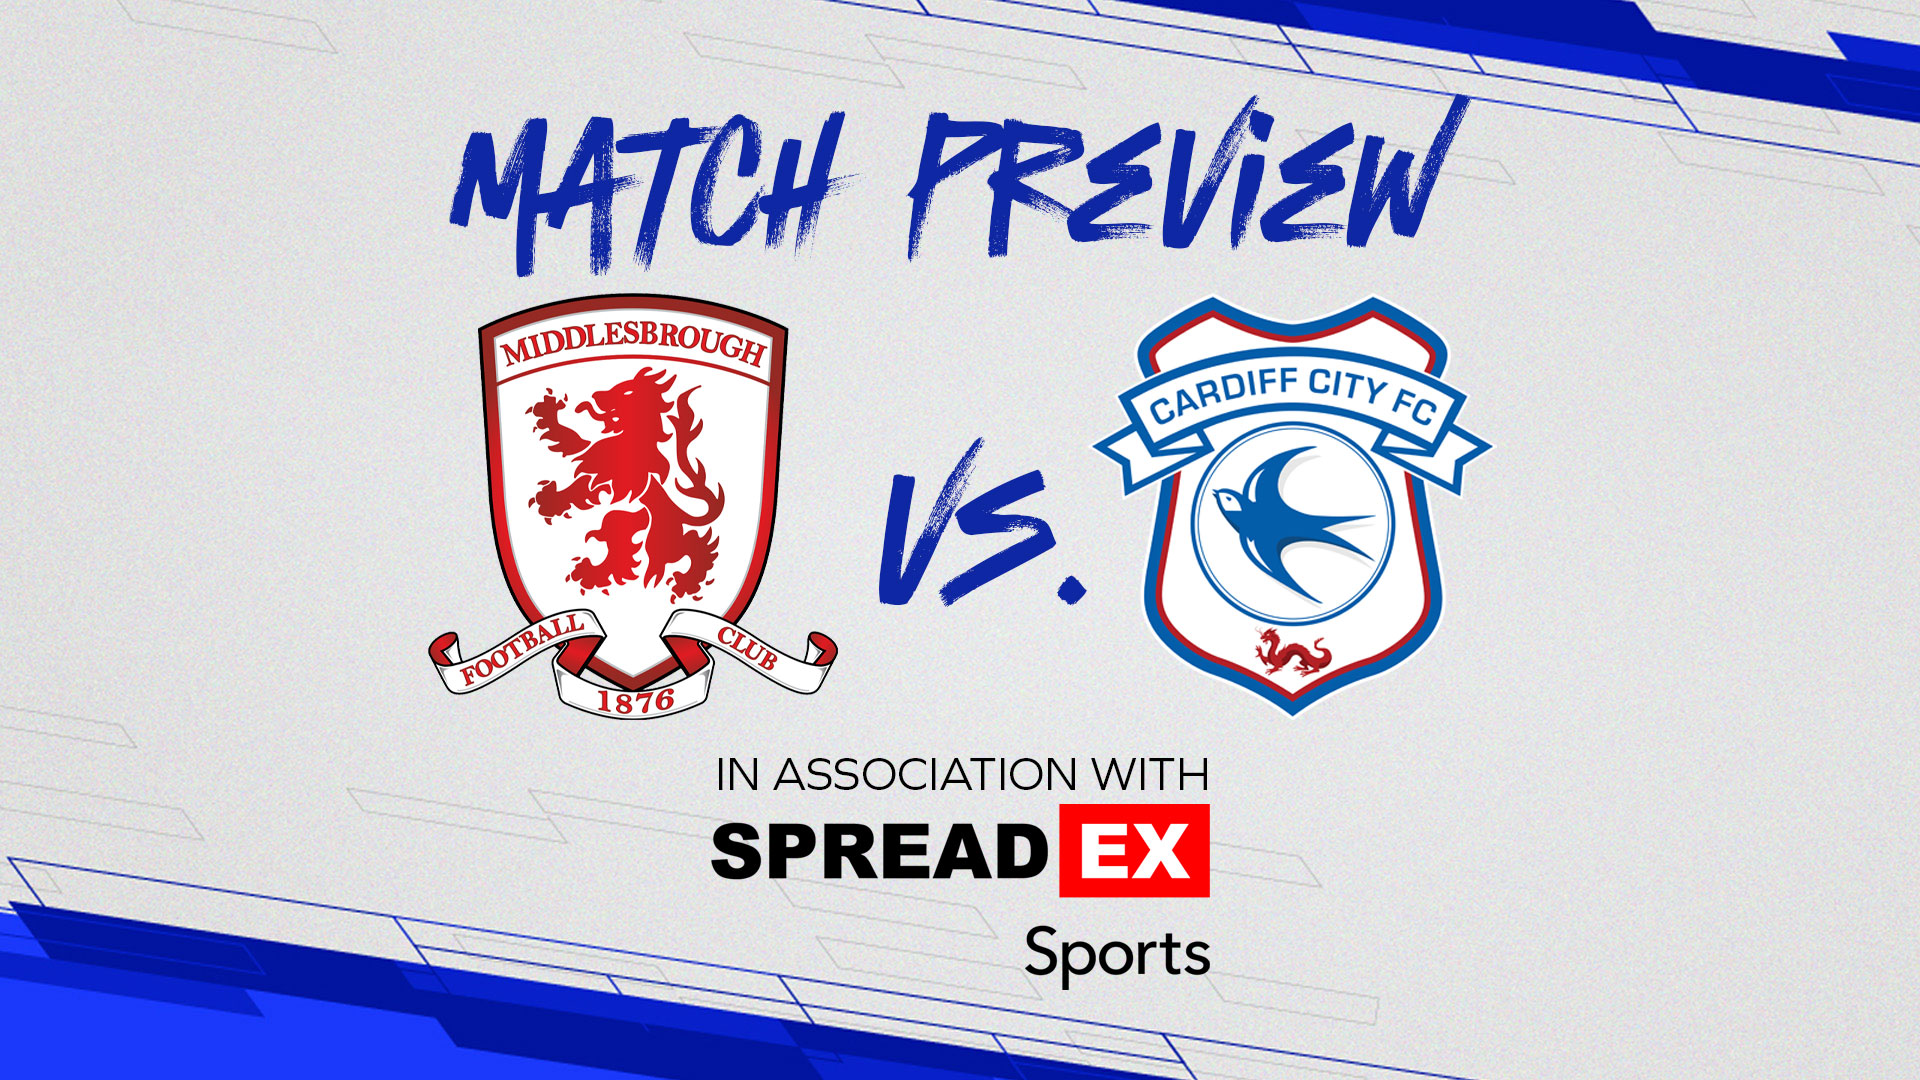 Match Preview: Middlesbrough vs. Cardiff City